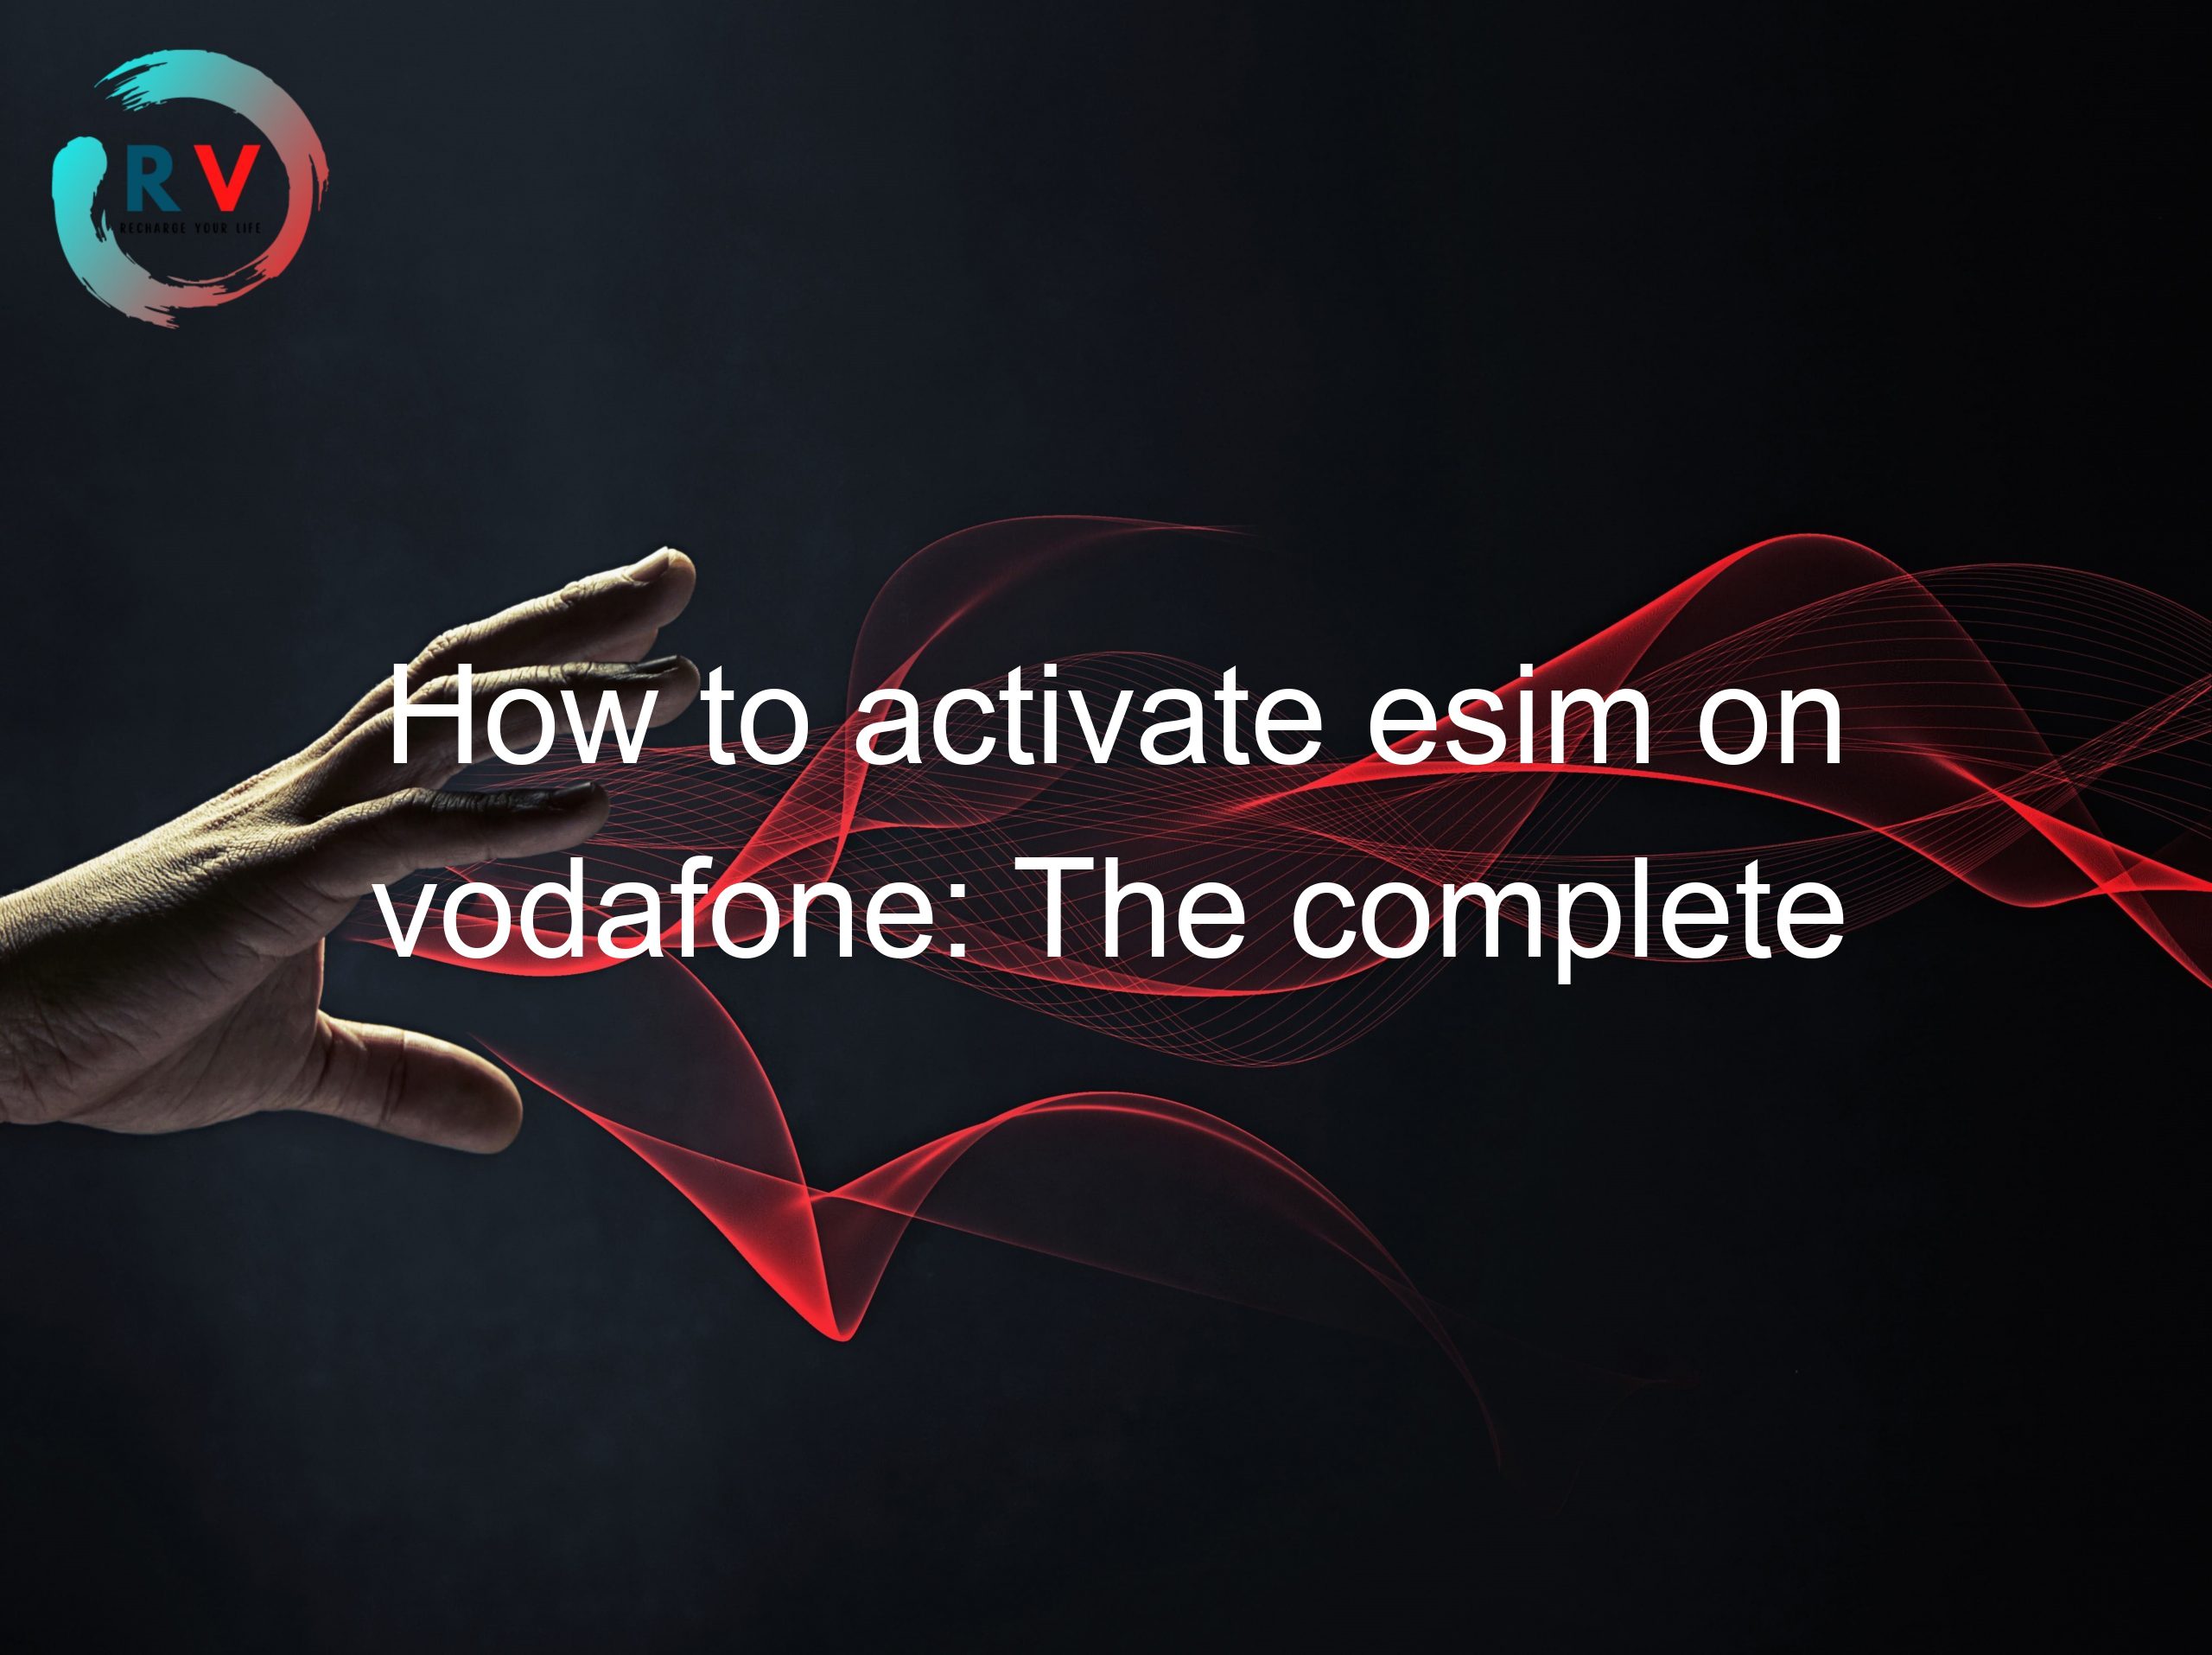 How to activate esim on vodafone: The complete guide